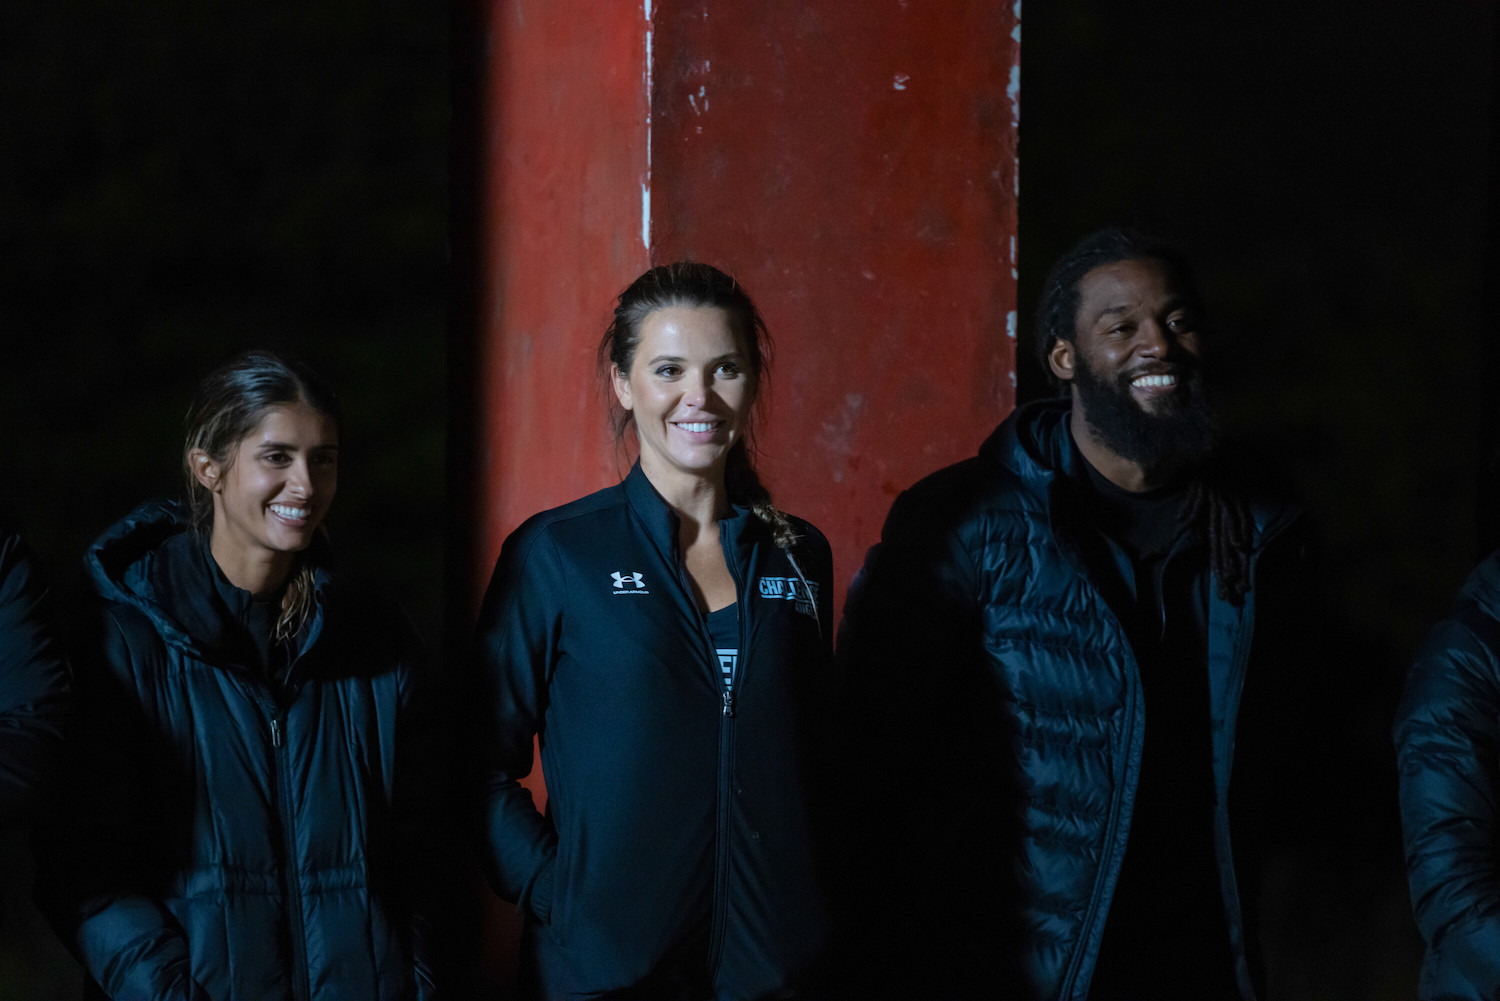 Alyssa, Angela, and Danny in 'The Challenge: USA' finale during a night challenge